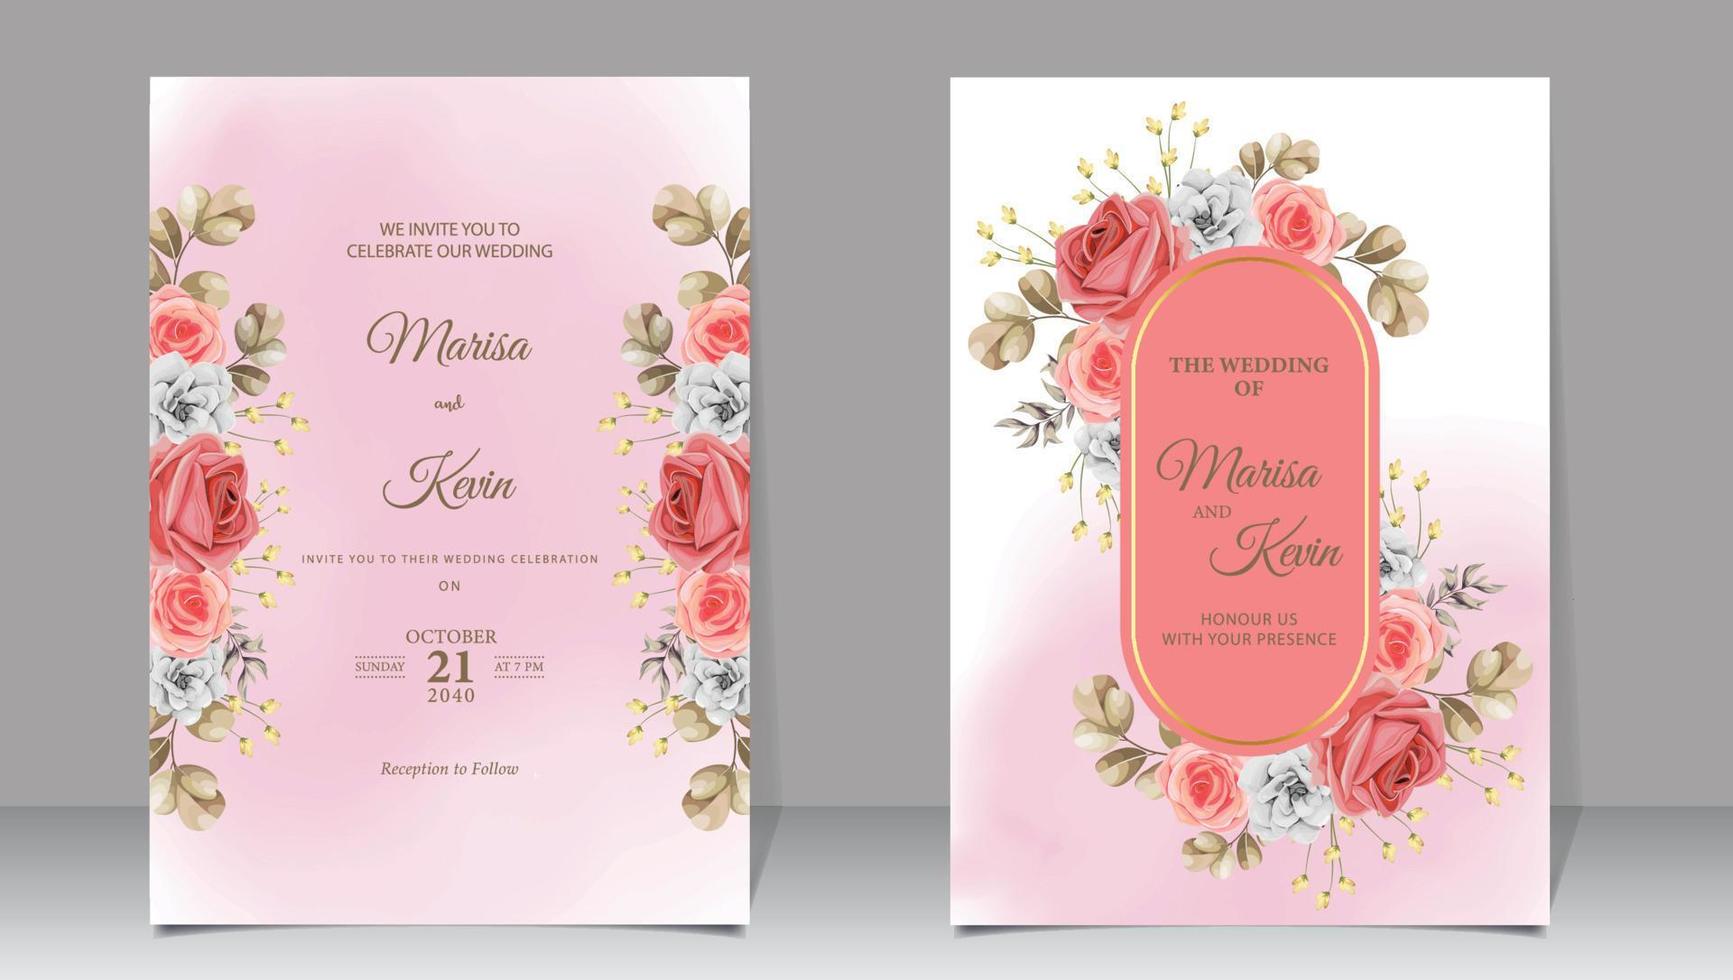 Luxury wedding invitation with red and white flowers on watercolor background vector